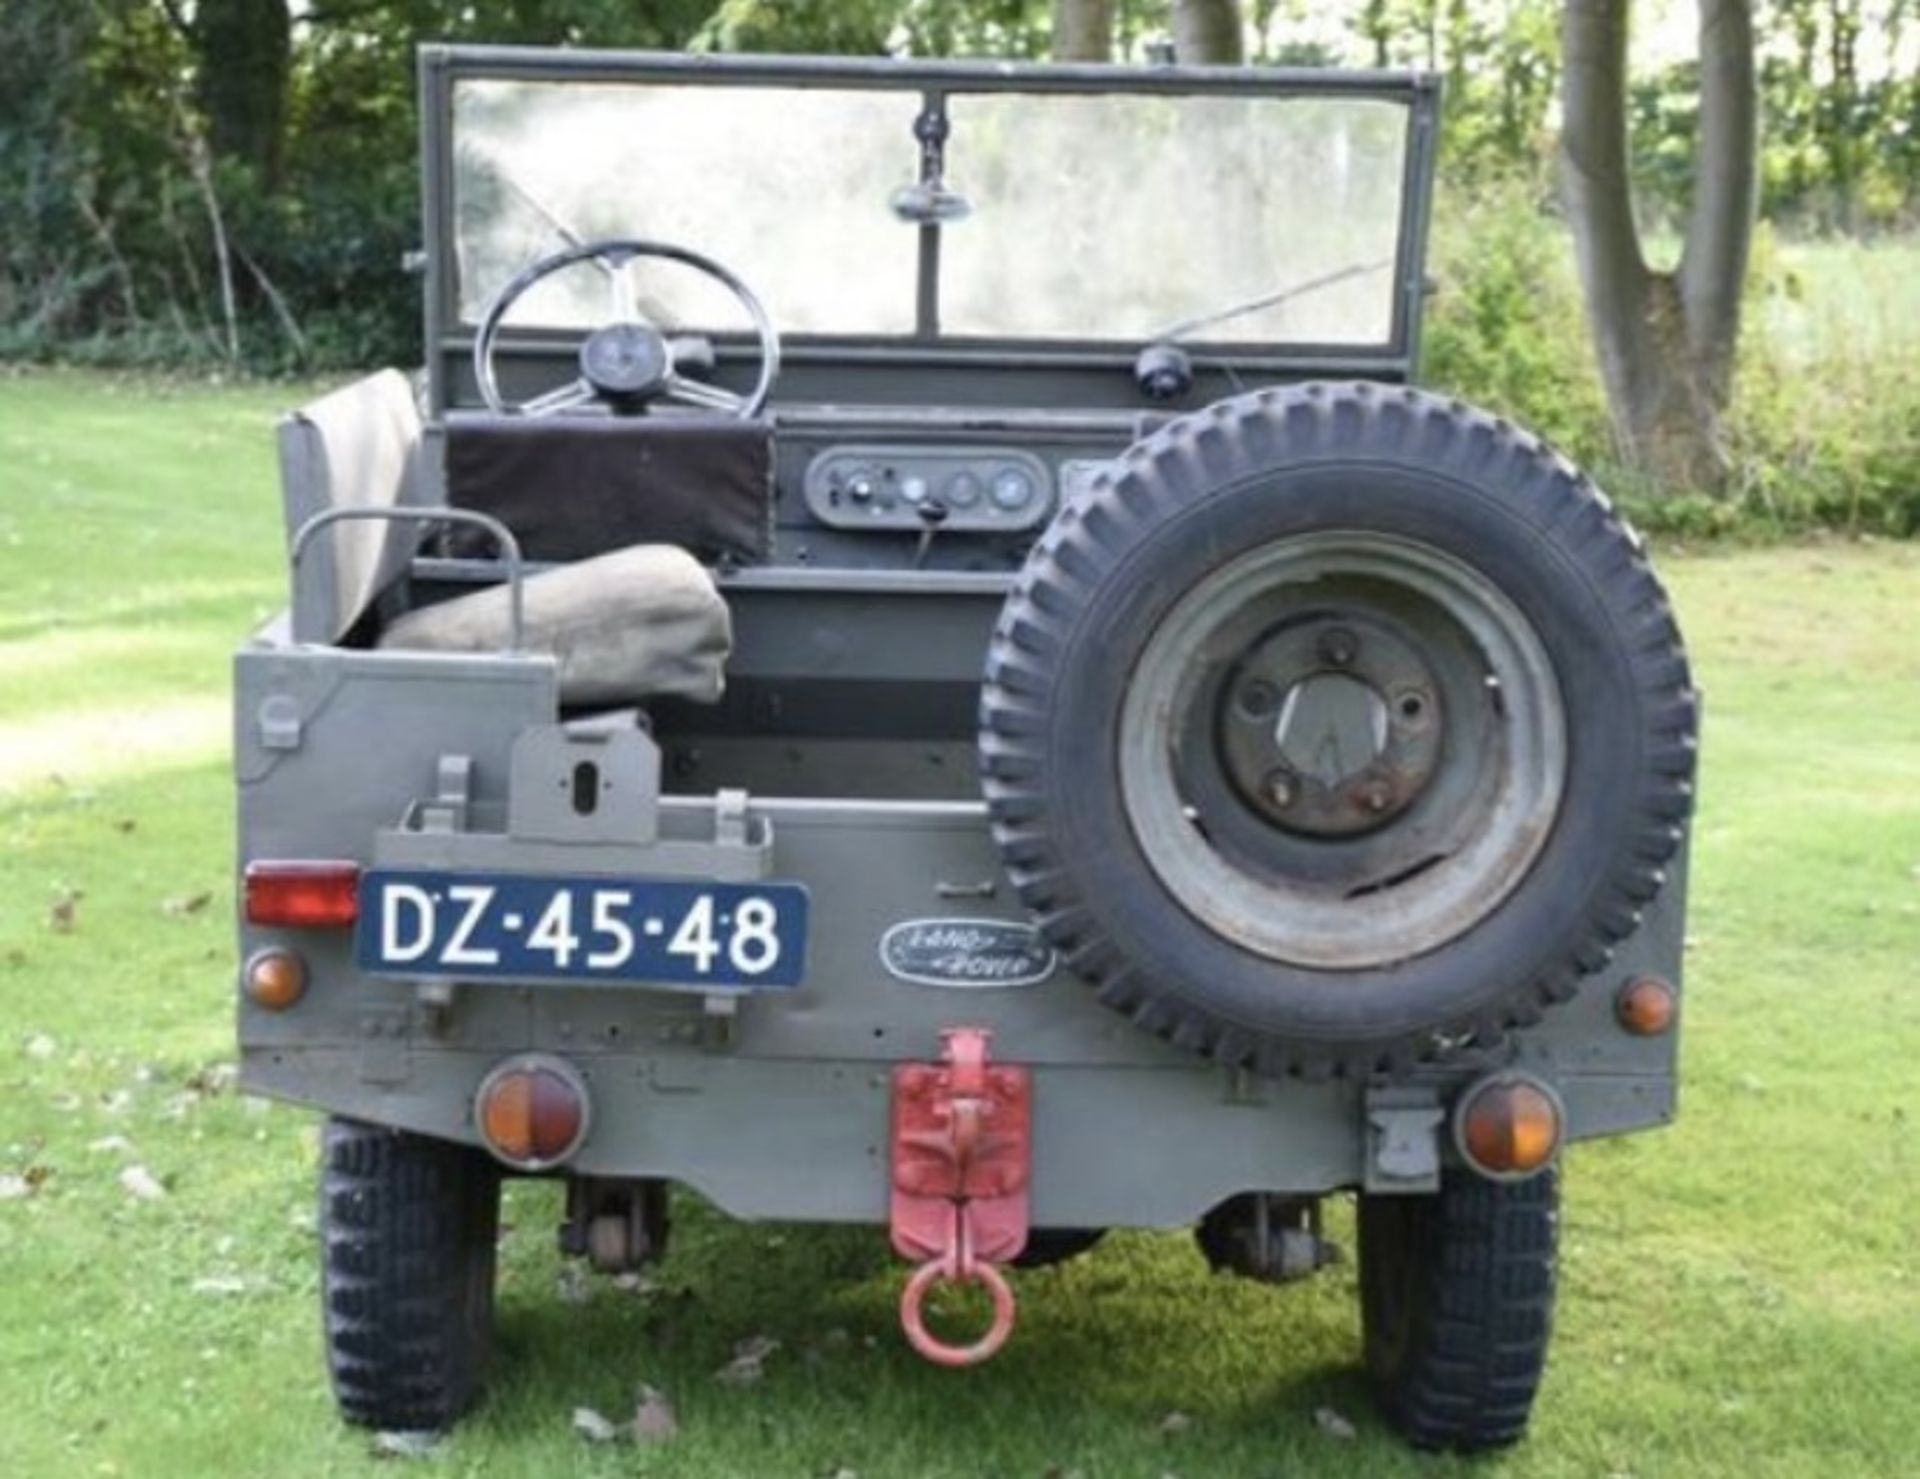 LAND ROVER SERIES 1 1952 - Image 4 of 9